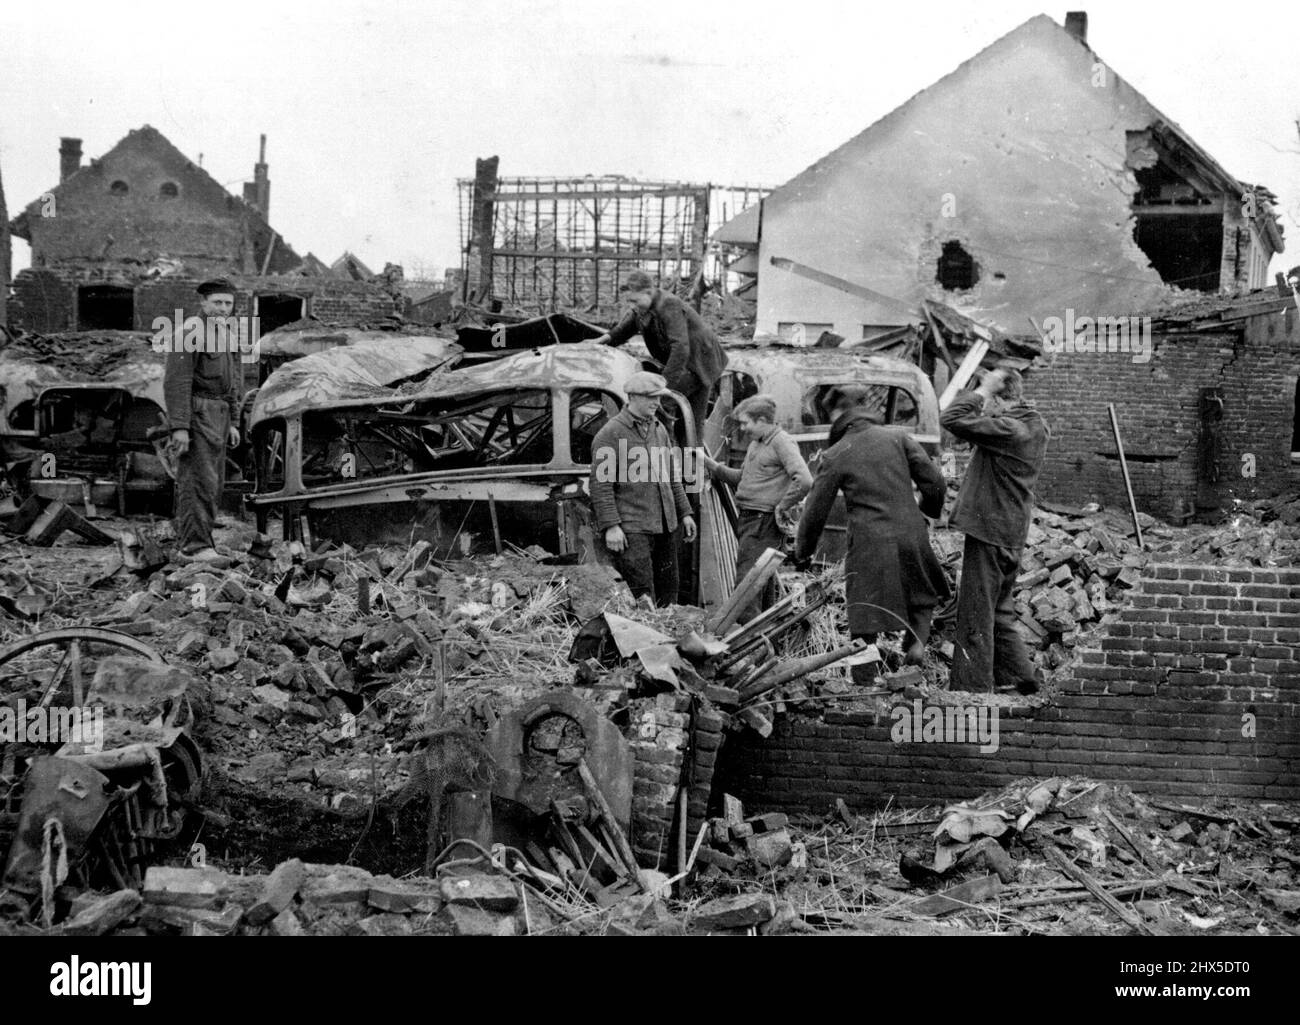 R.A.F. Typhoons Smash German Strongpoint : Wrecked motor coaches in Montfort. Montfort, a Dutch town South of Roermond and east of Echt, was a German Strongpoint until the R.A.F., were called into attack it. R.A.F. Rocket-firing Typhoons did so much damage that the Germans were forced to evacuate the town and British troops marched in. May 14, 1945. (Photo by British Official Photograph). Stock Photo